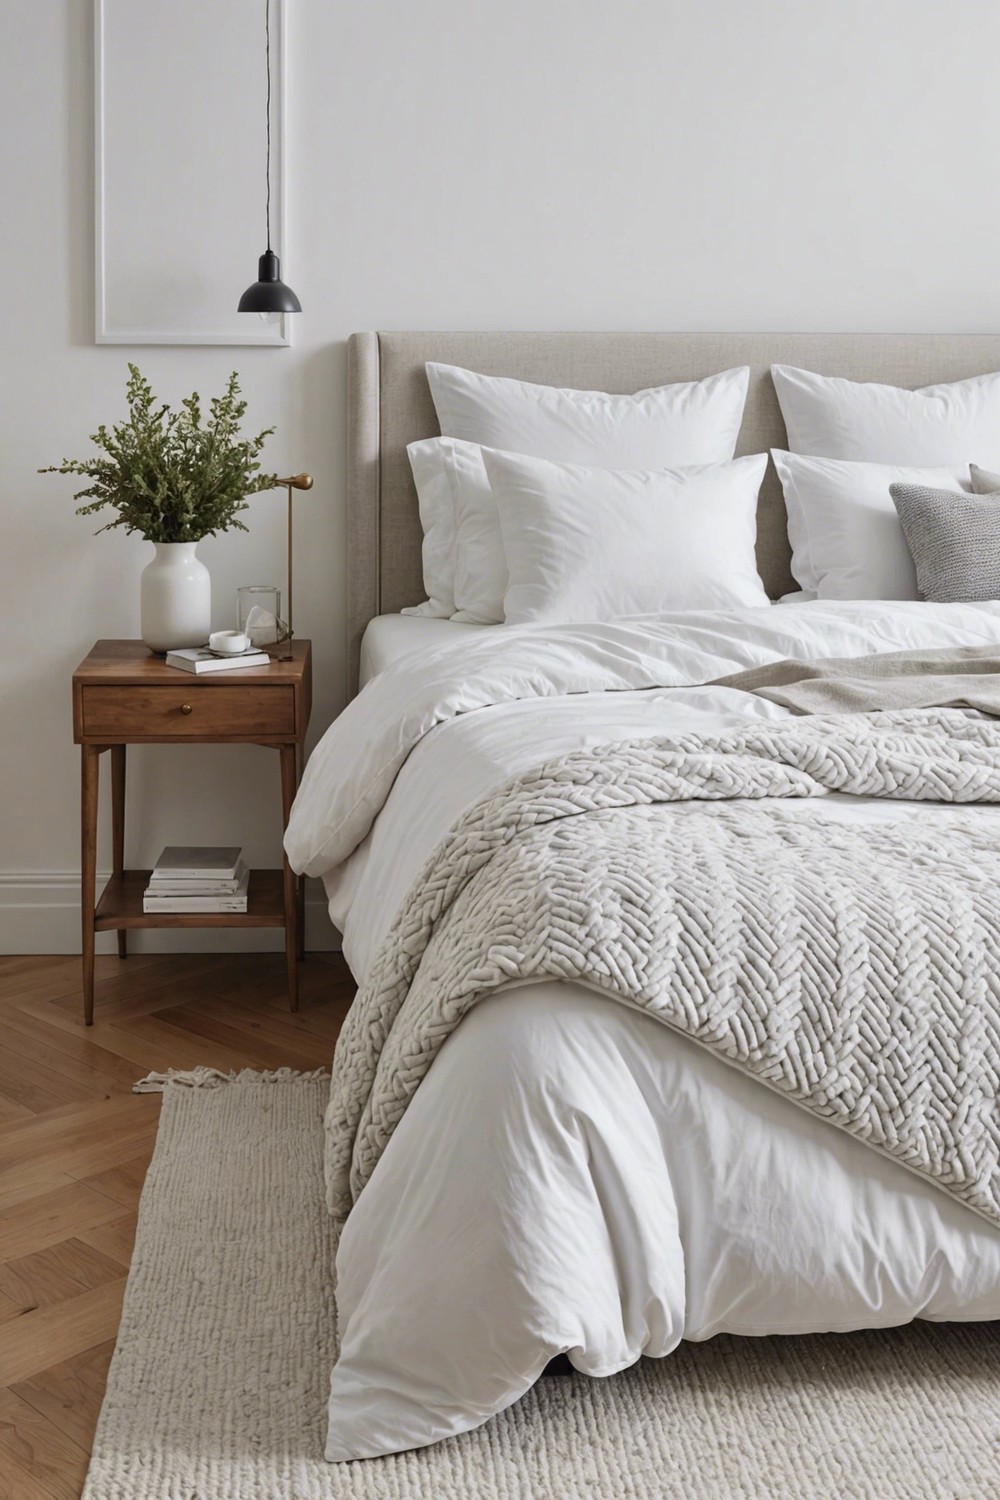 Monochromatic Magic: White Bedroom with White-on-White Patterns